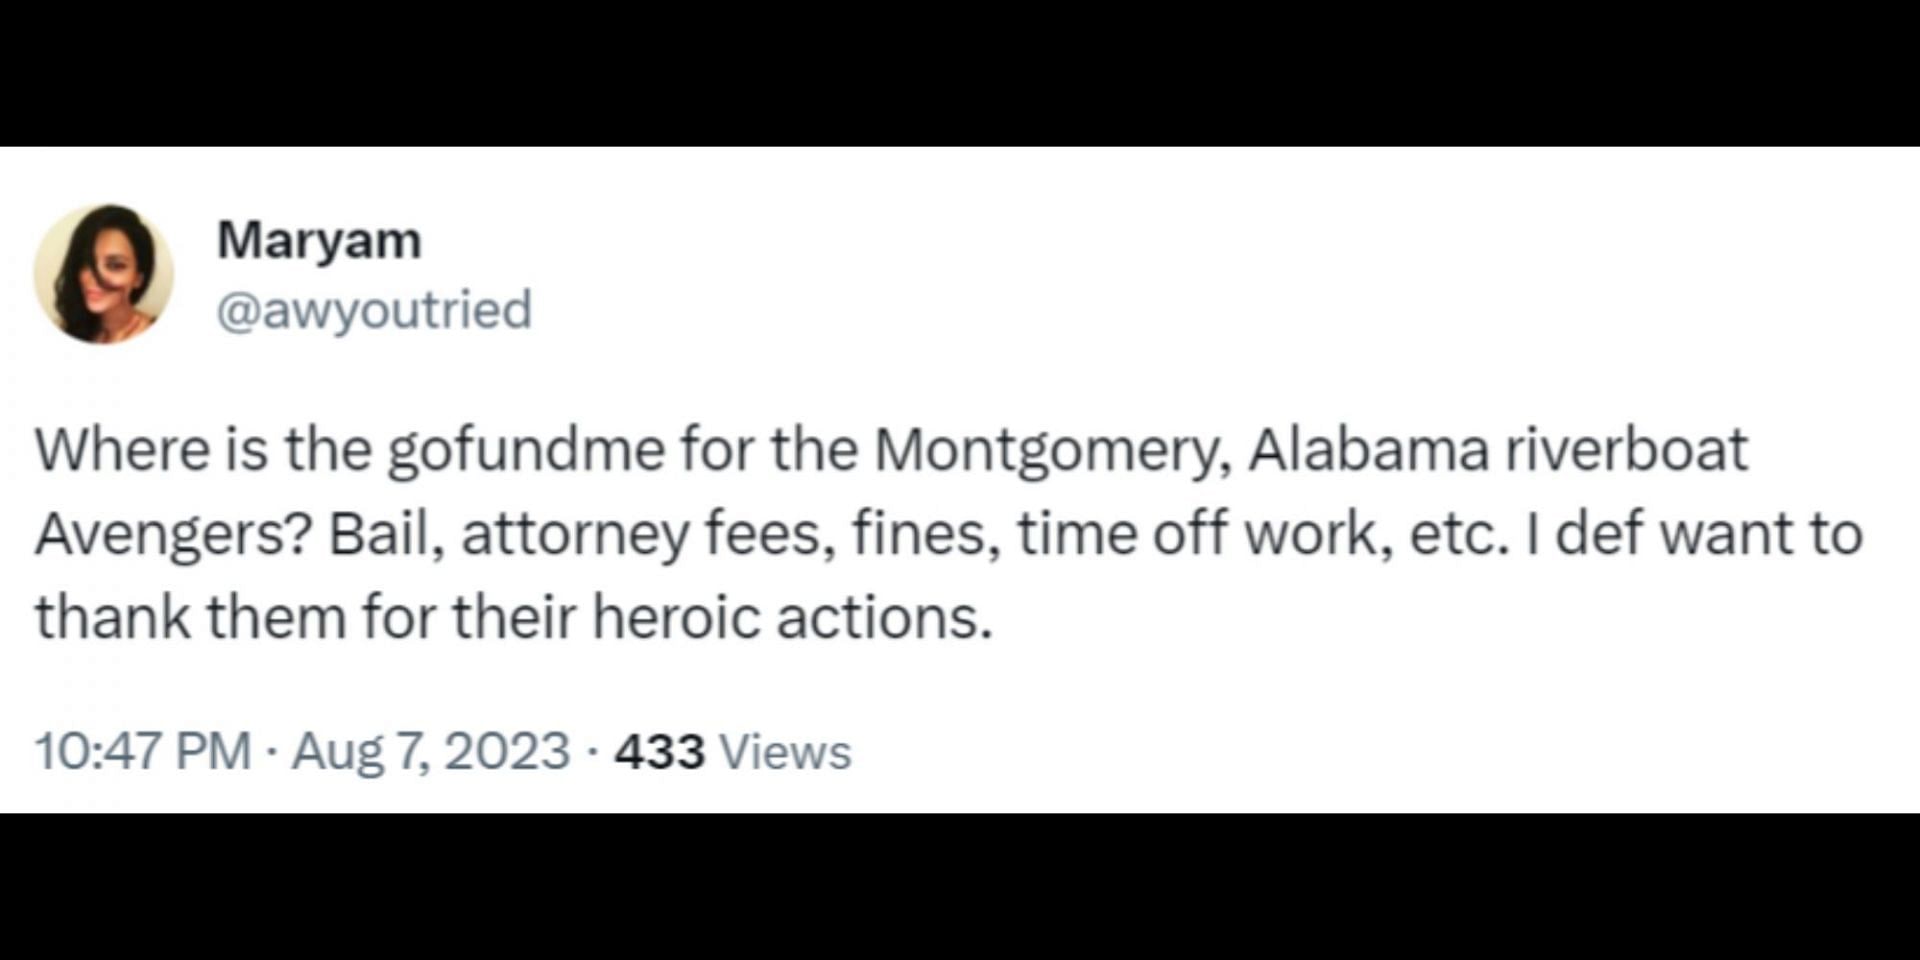 Many people wanted to help the Black men who helped the dockworker at the Montgomery Riverfront brawl. (Image via Twitter/@awyoutried)